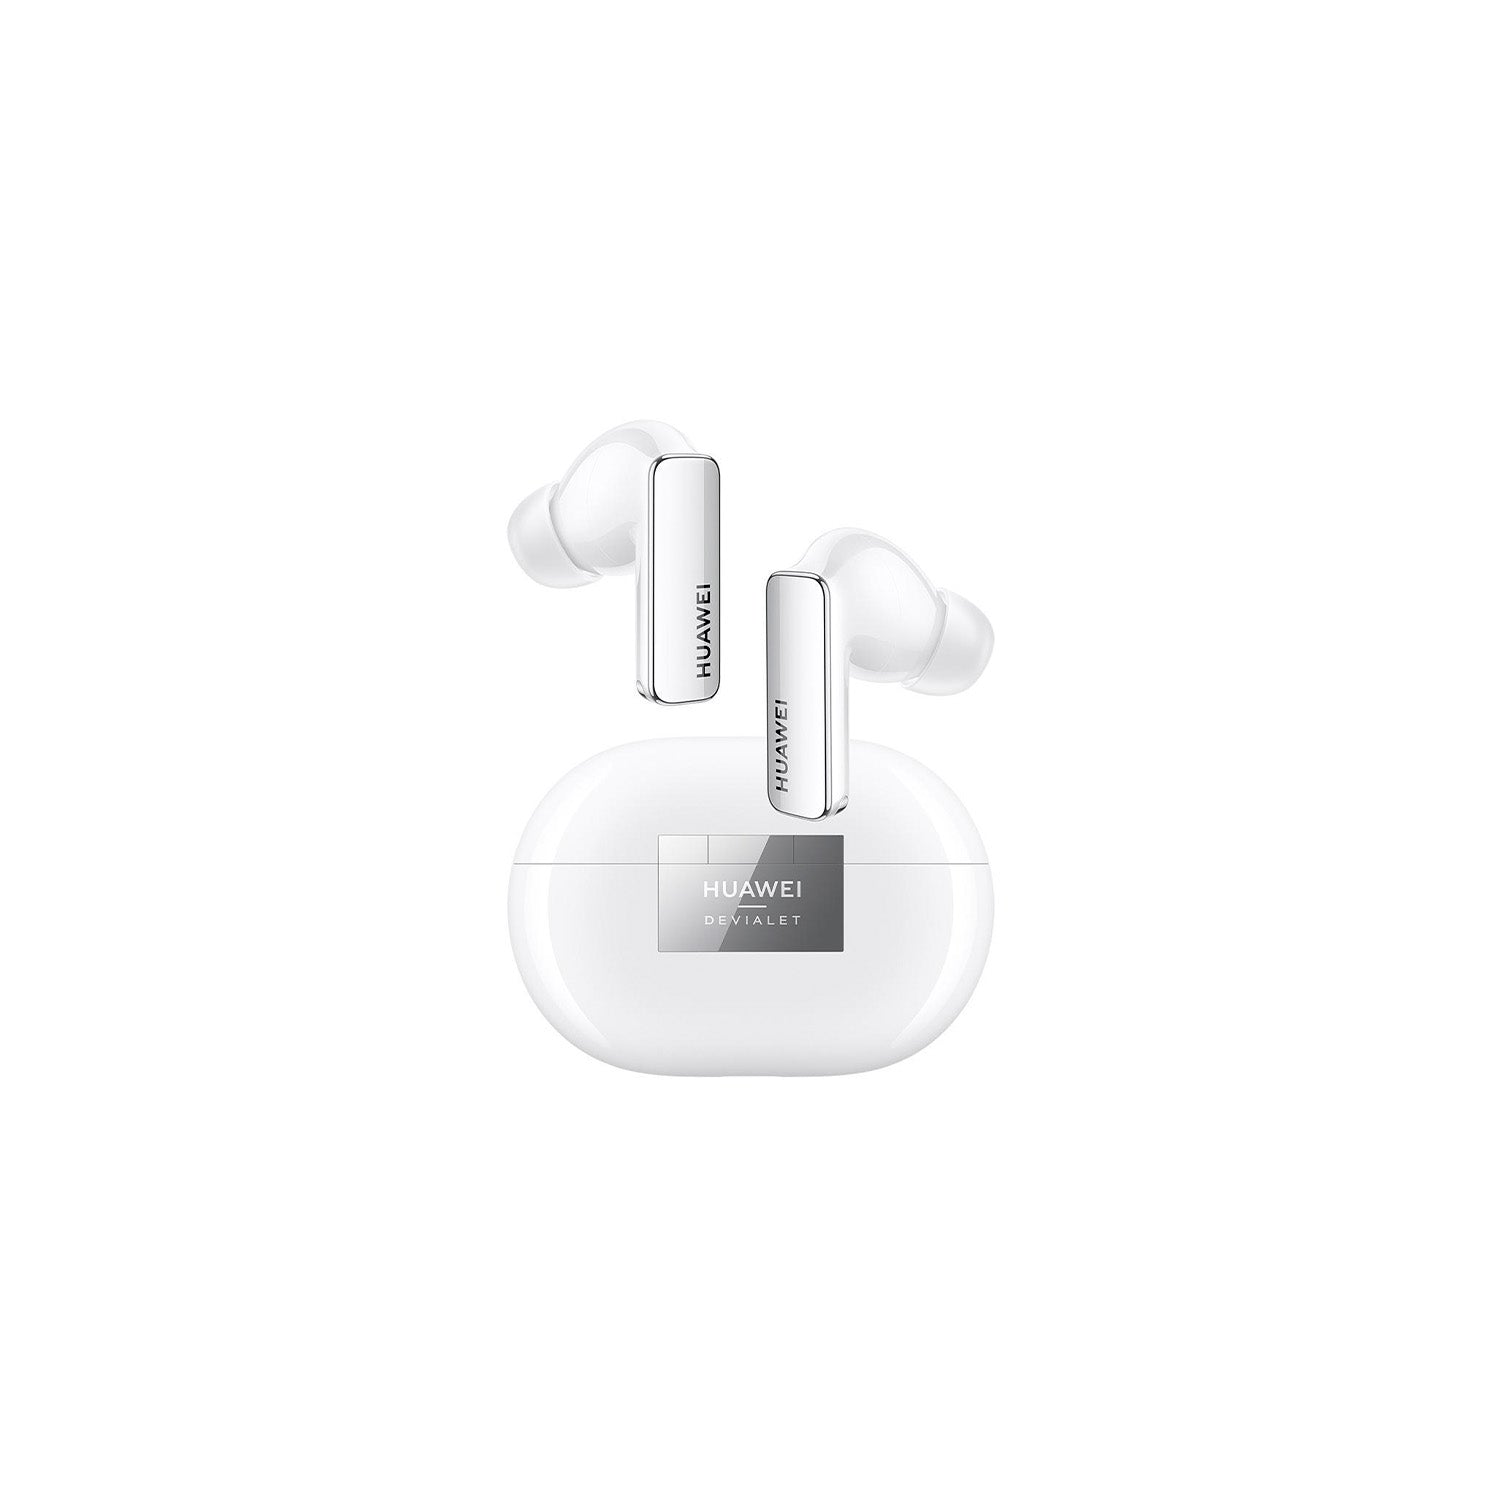 HUAWEI Freebuds Pro 2 Wireless Earbuds - Active noise cancellation | Dual-Speaker | 11 mm  dynamic driver | Bluetooth 5.2, Water Resistant in-Ear Headphones - Ceramic White (55035972)